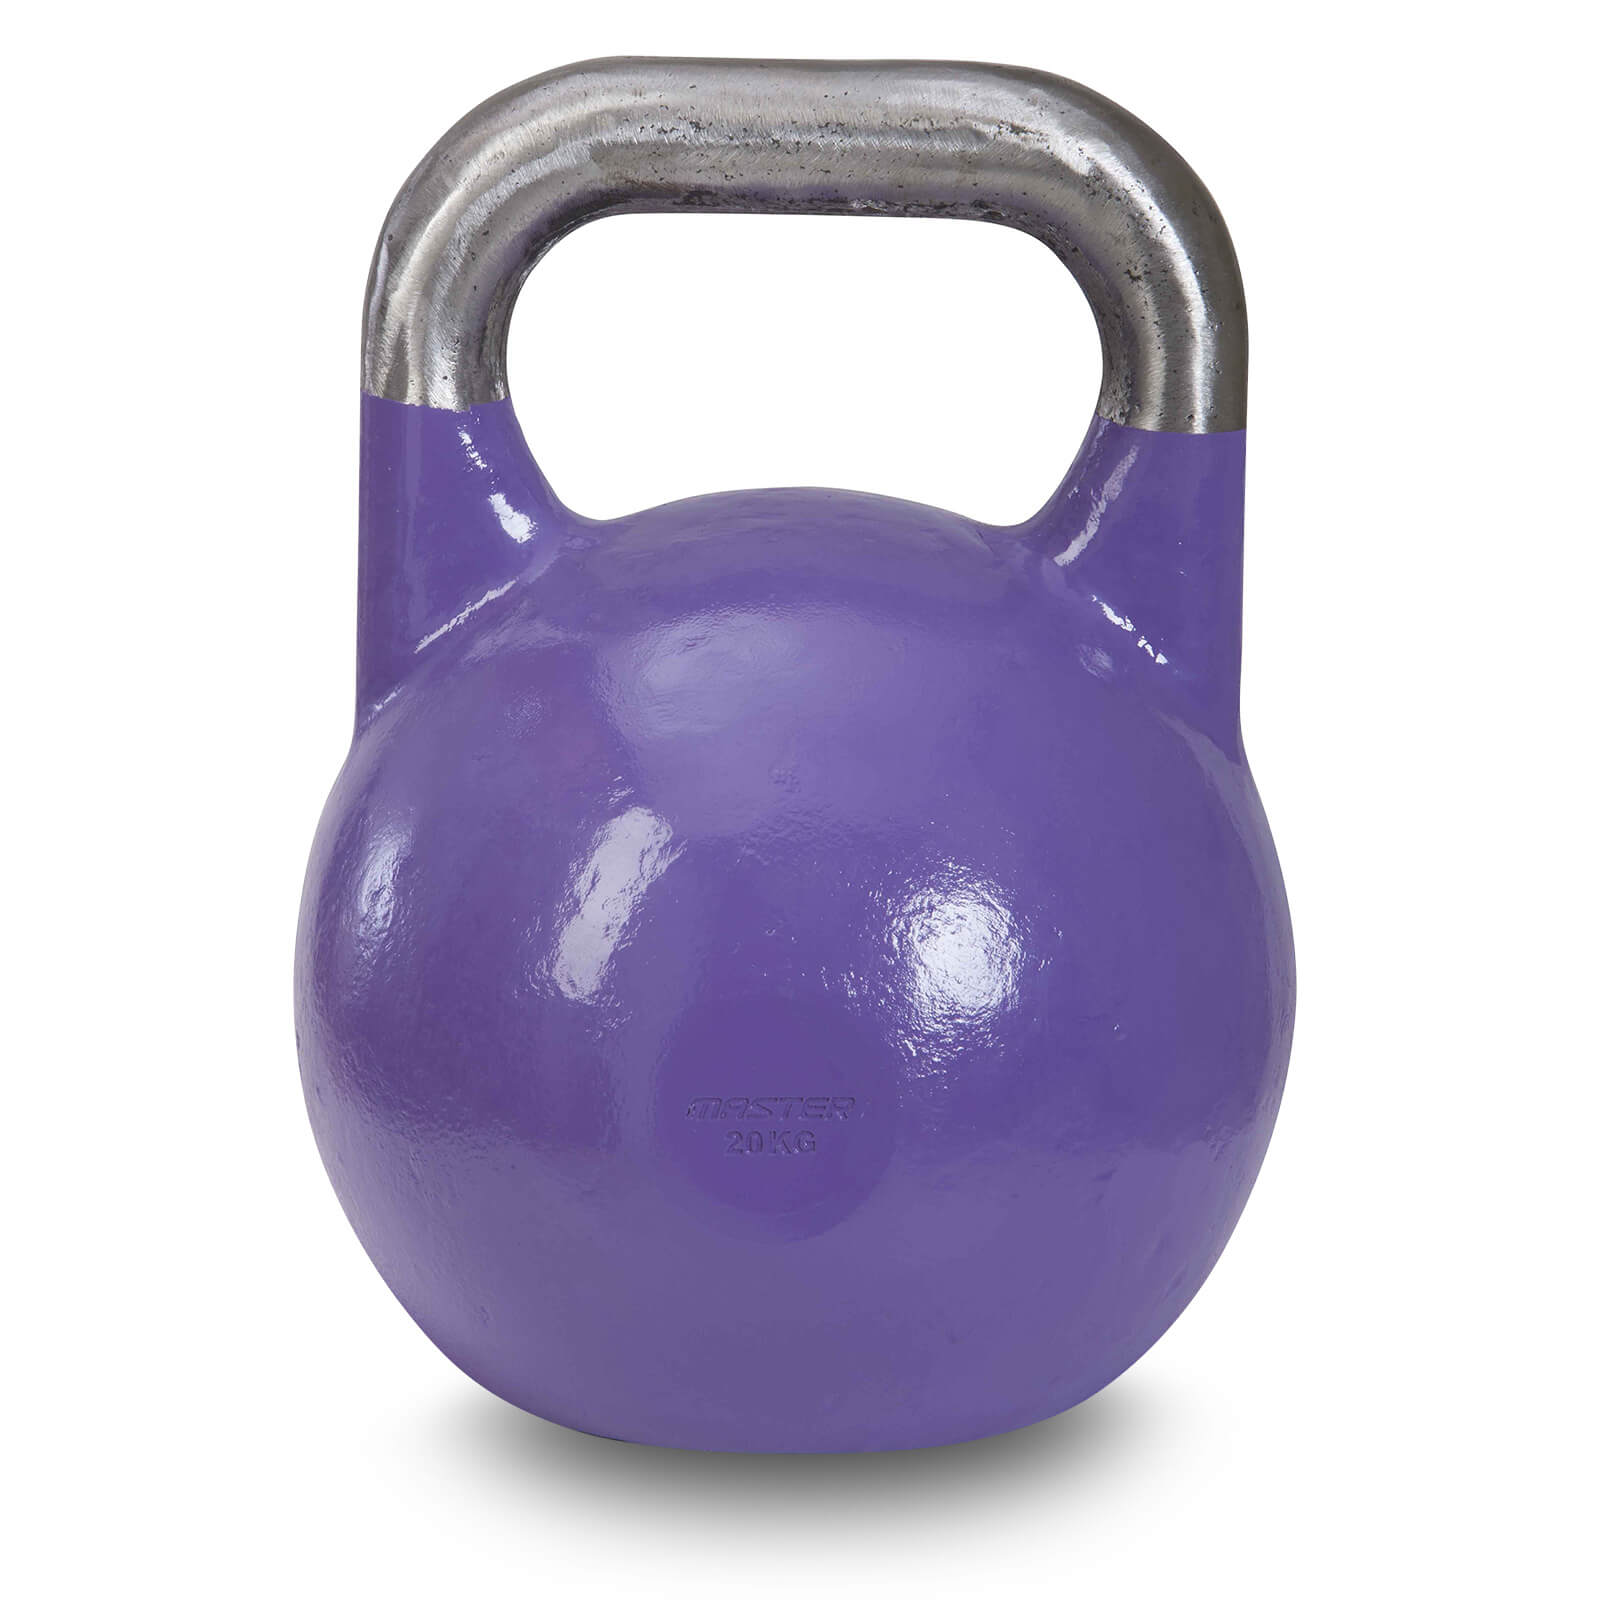 Competition kettlebell, 20 kg